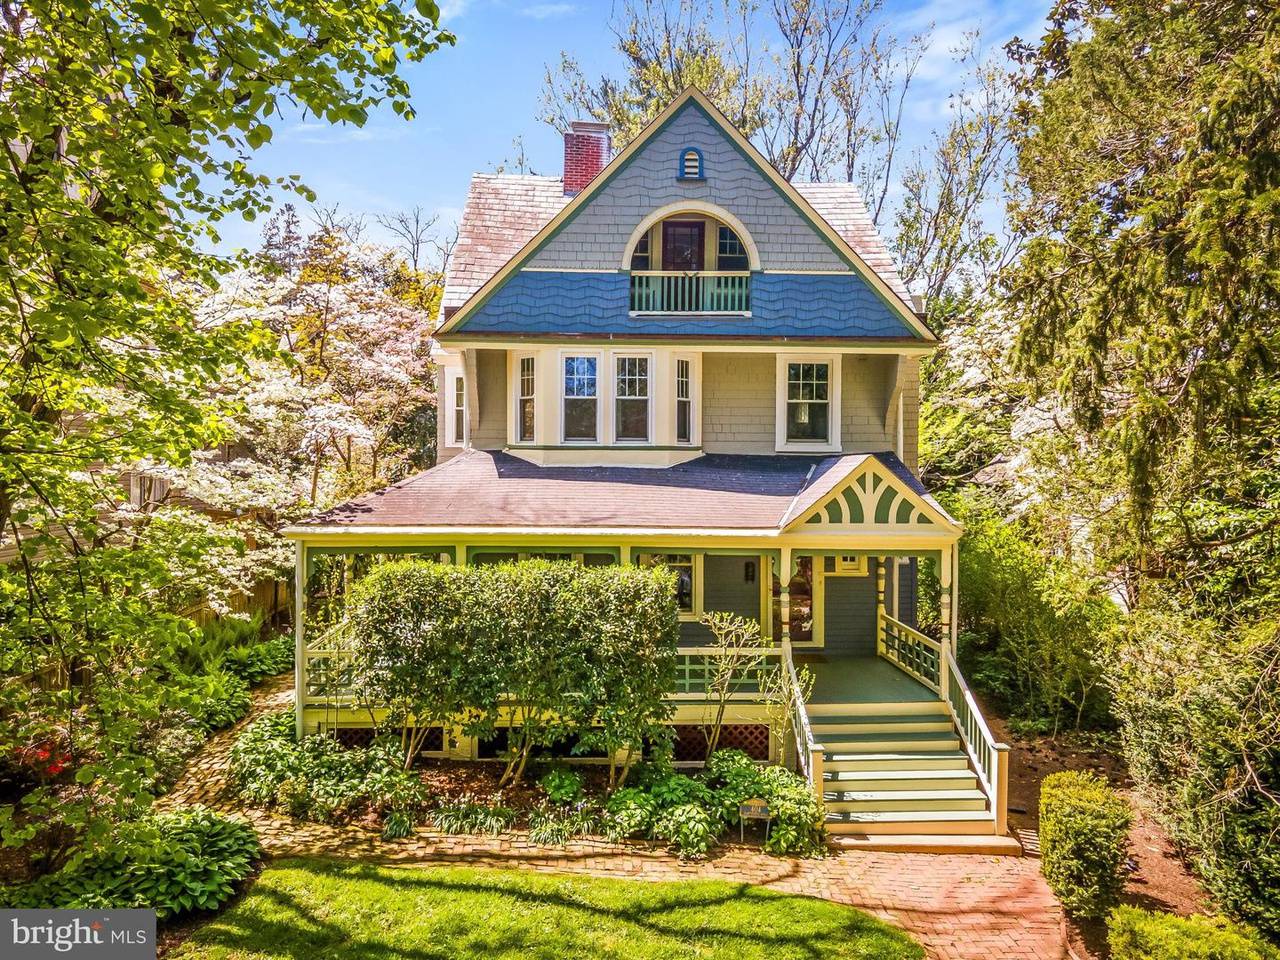 A shingle style cottage home in Roland Park with lots of trees and greenery around it.